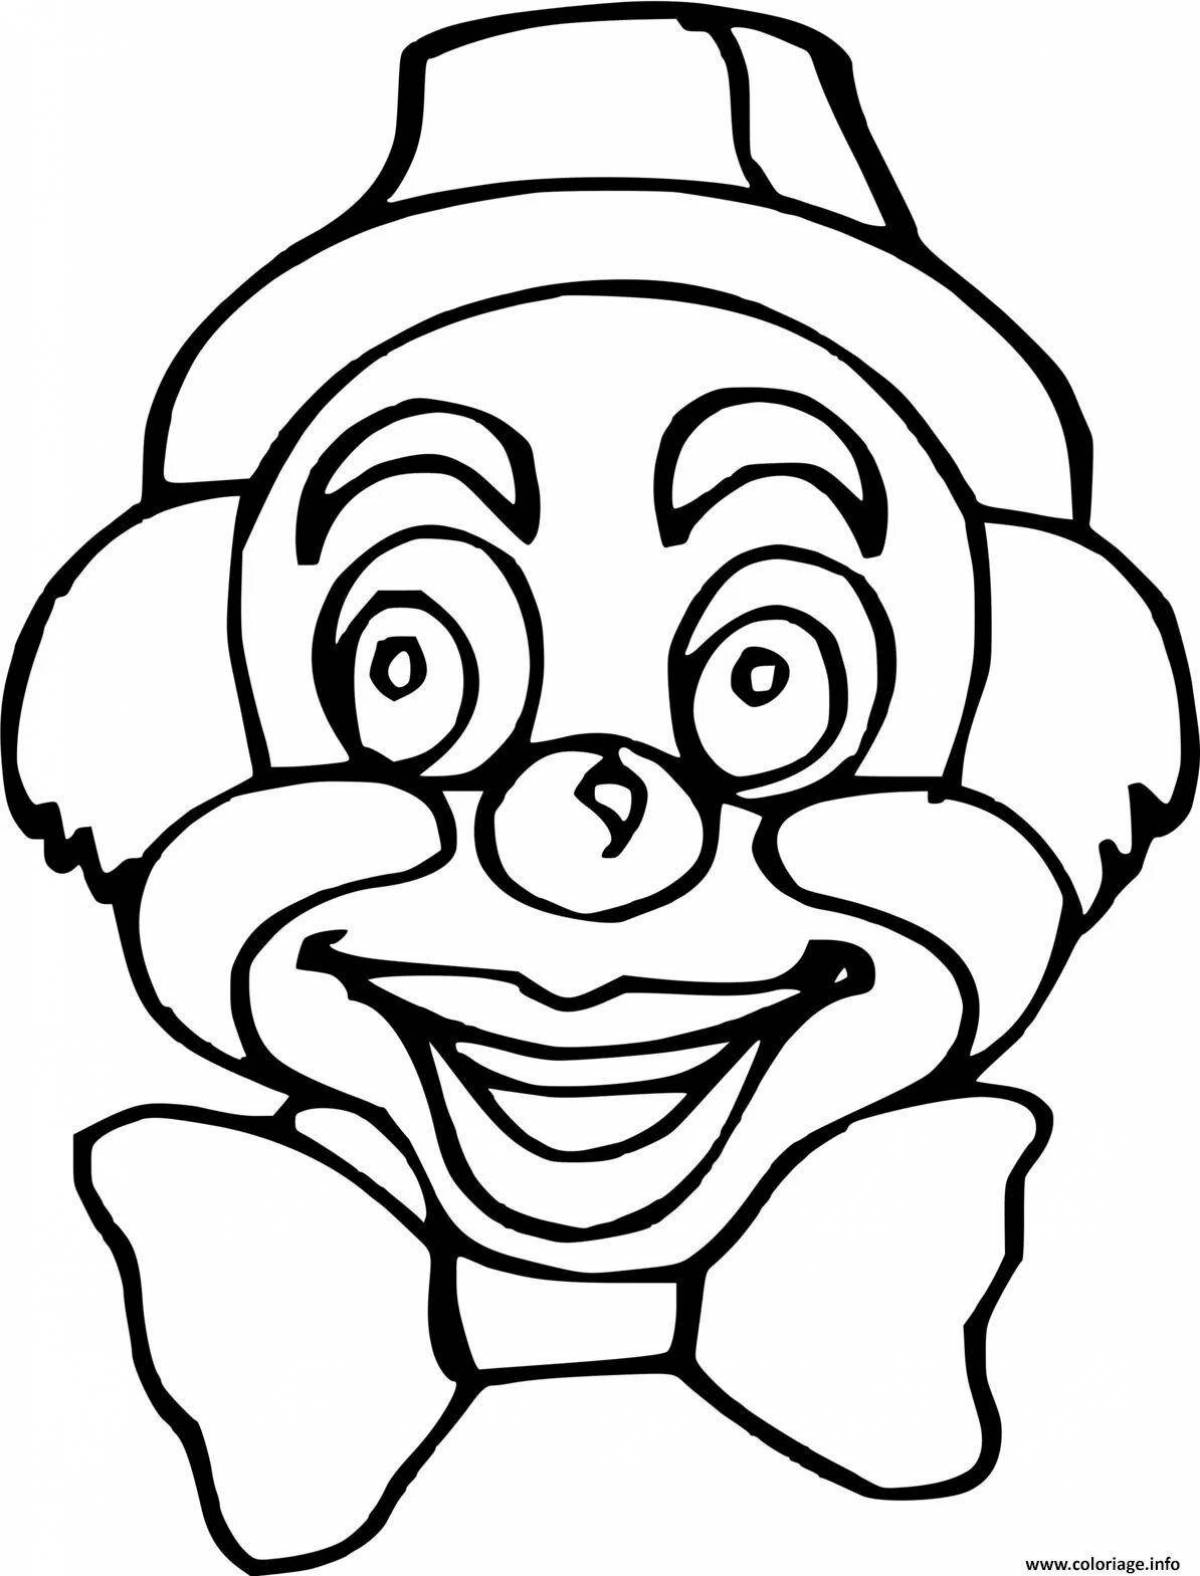 Playful clown mask coloring page